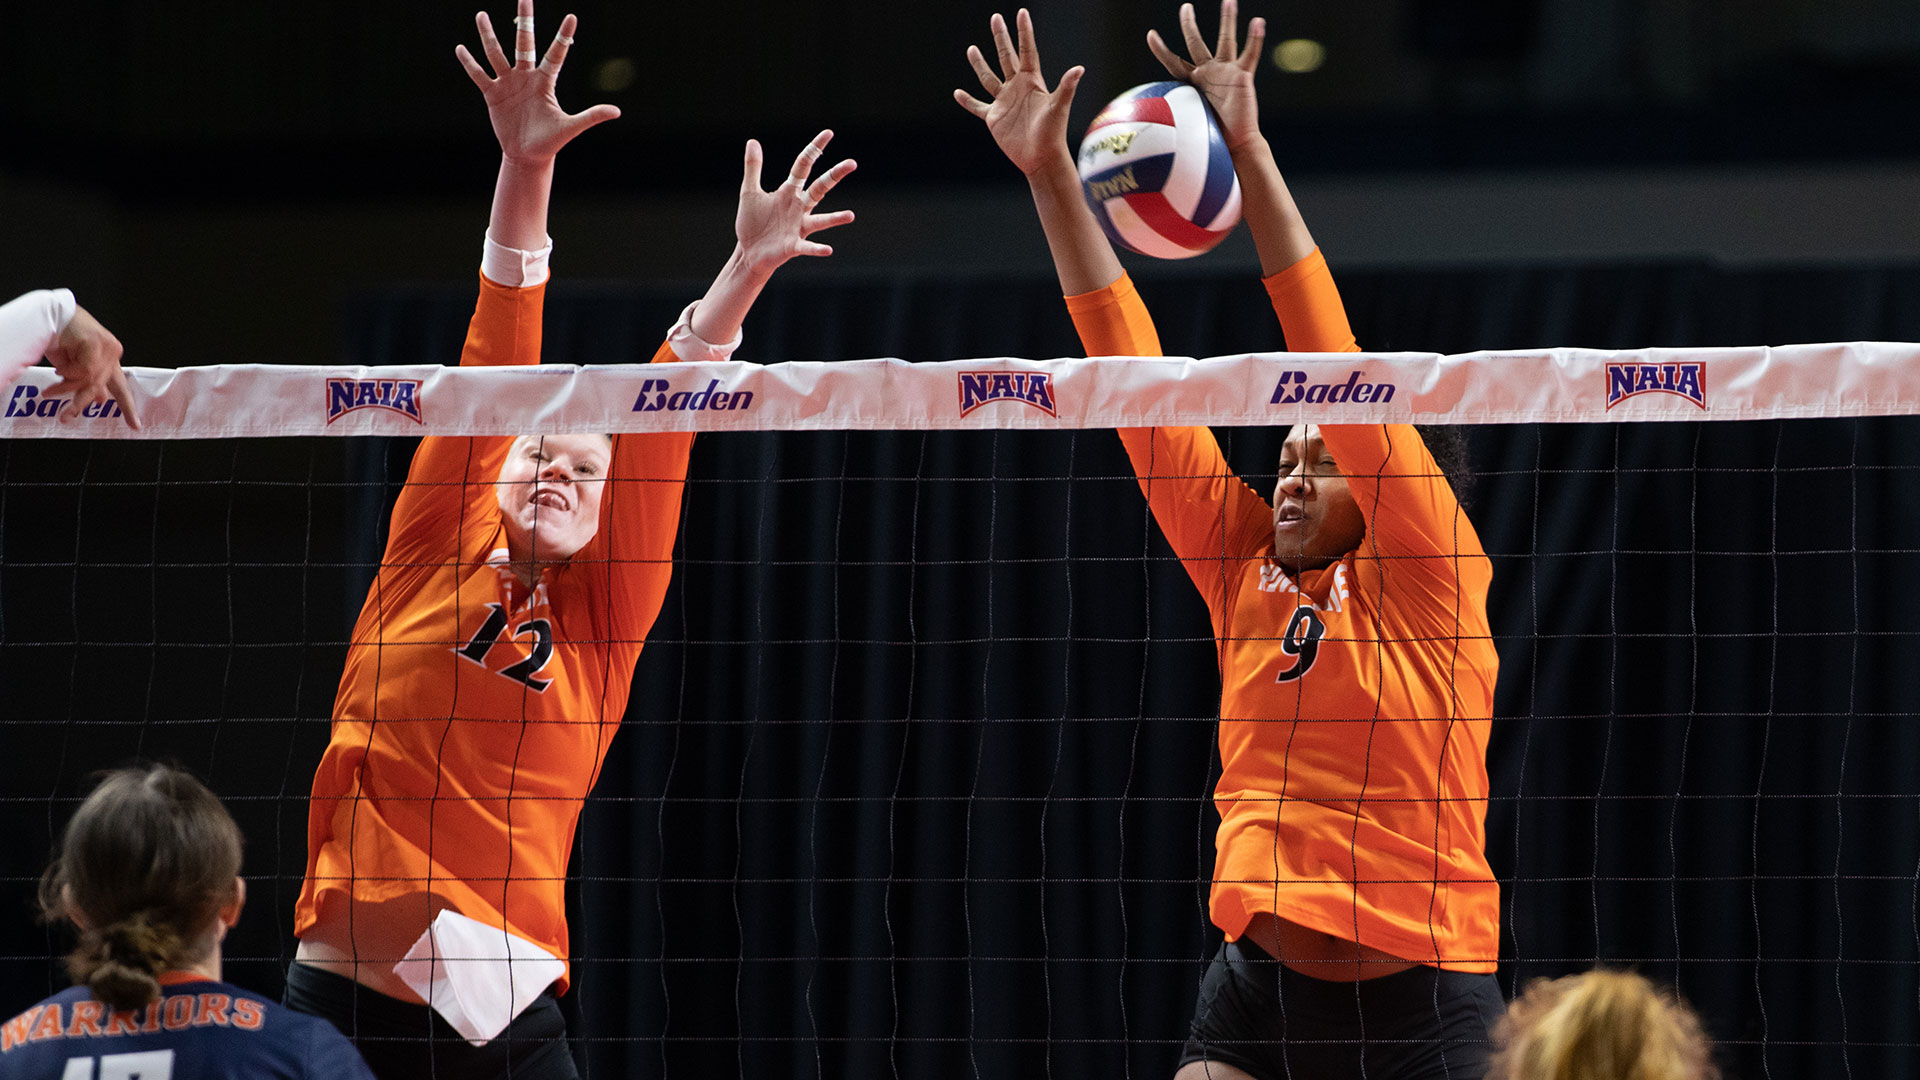 Championship bound: Second-ranked Jimmies outlast No. 3 Midland in five-set classic